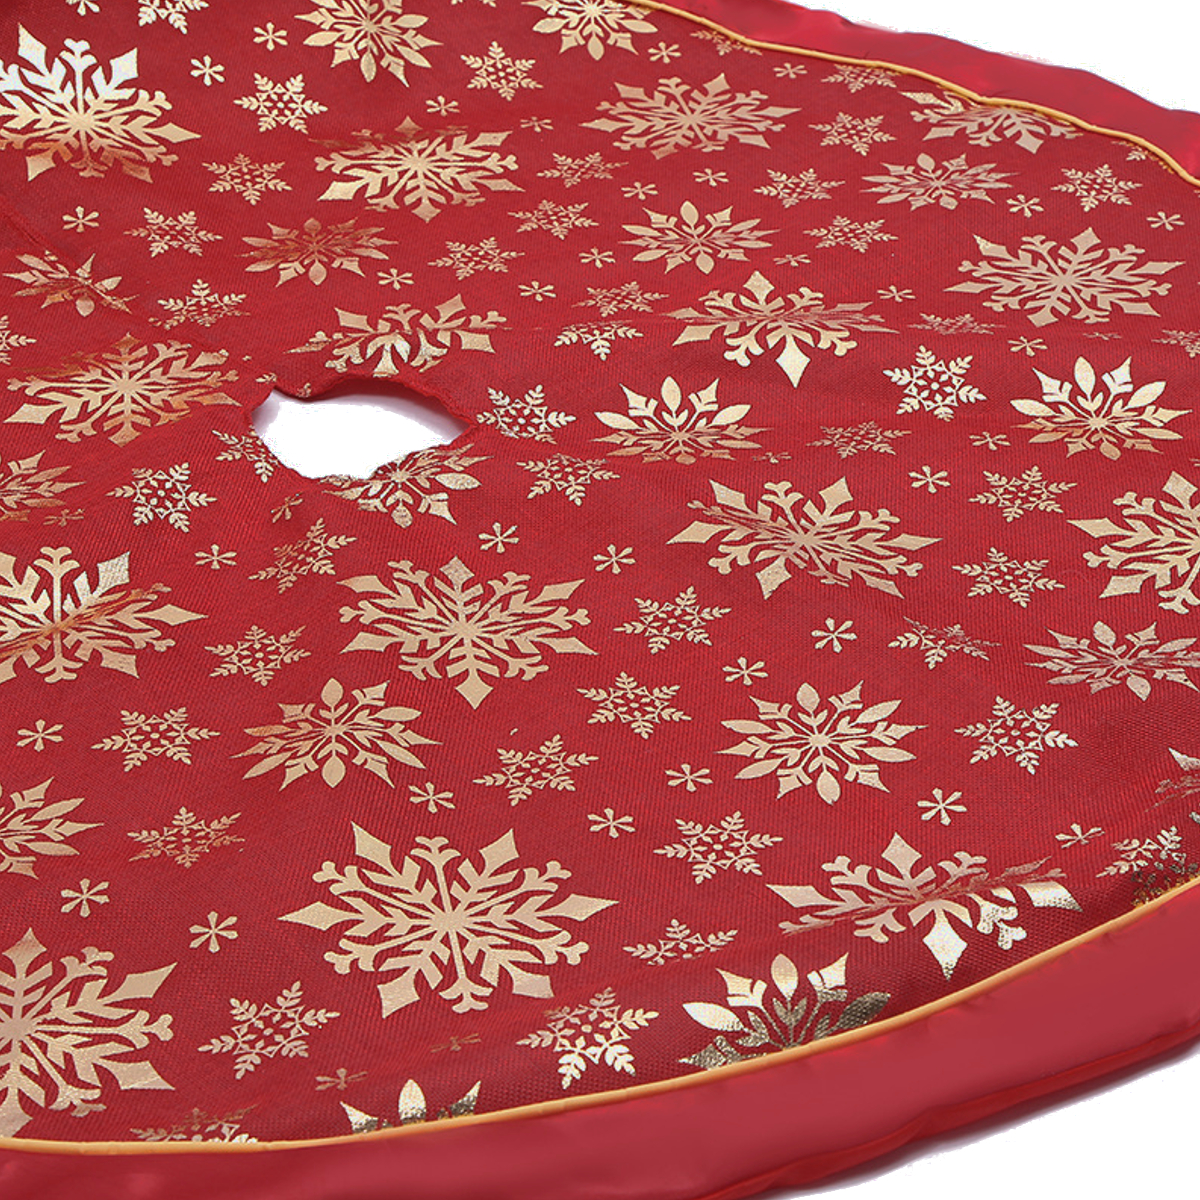 120cm-Stitched-Santa-Christmas-Snowflake-Skir-Tree-Skirt-for-Home-New-Year-2020-Christmas-Fancy-Deco-1770958-4